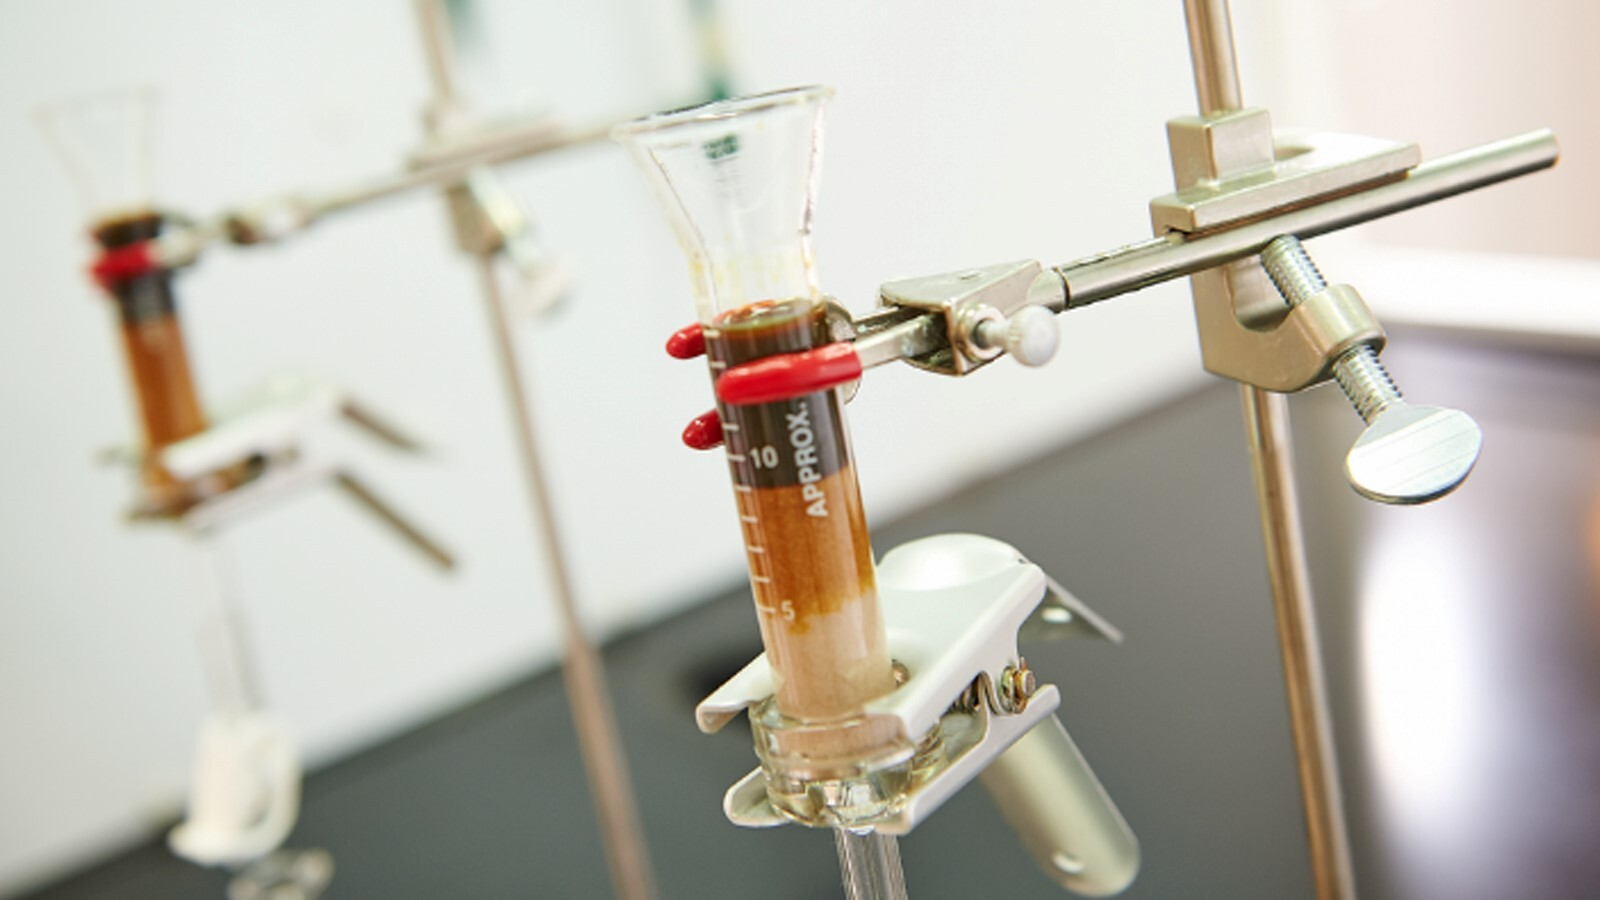 Stimulation chemicals in a test tube